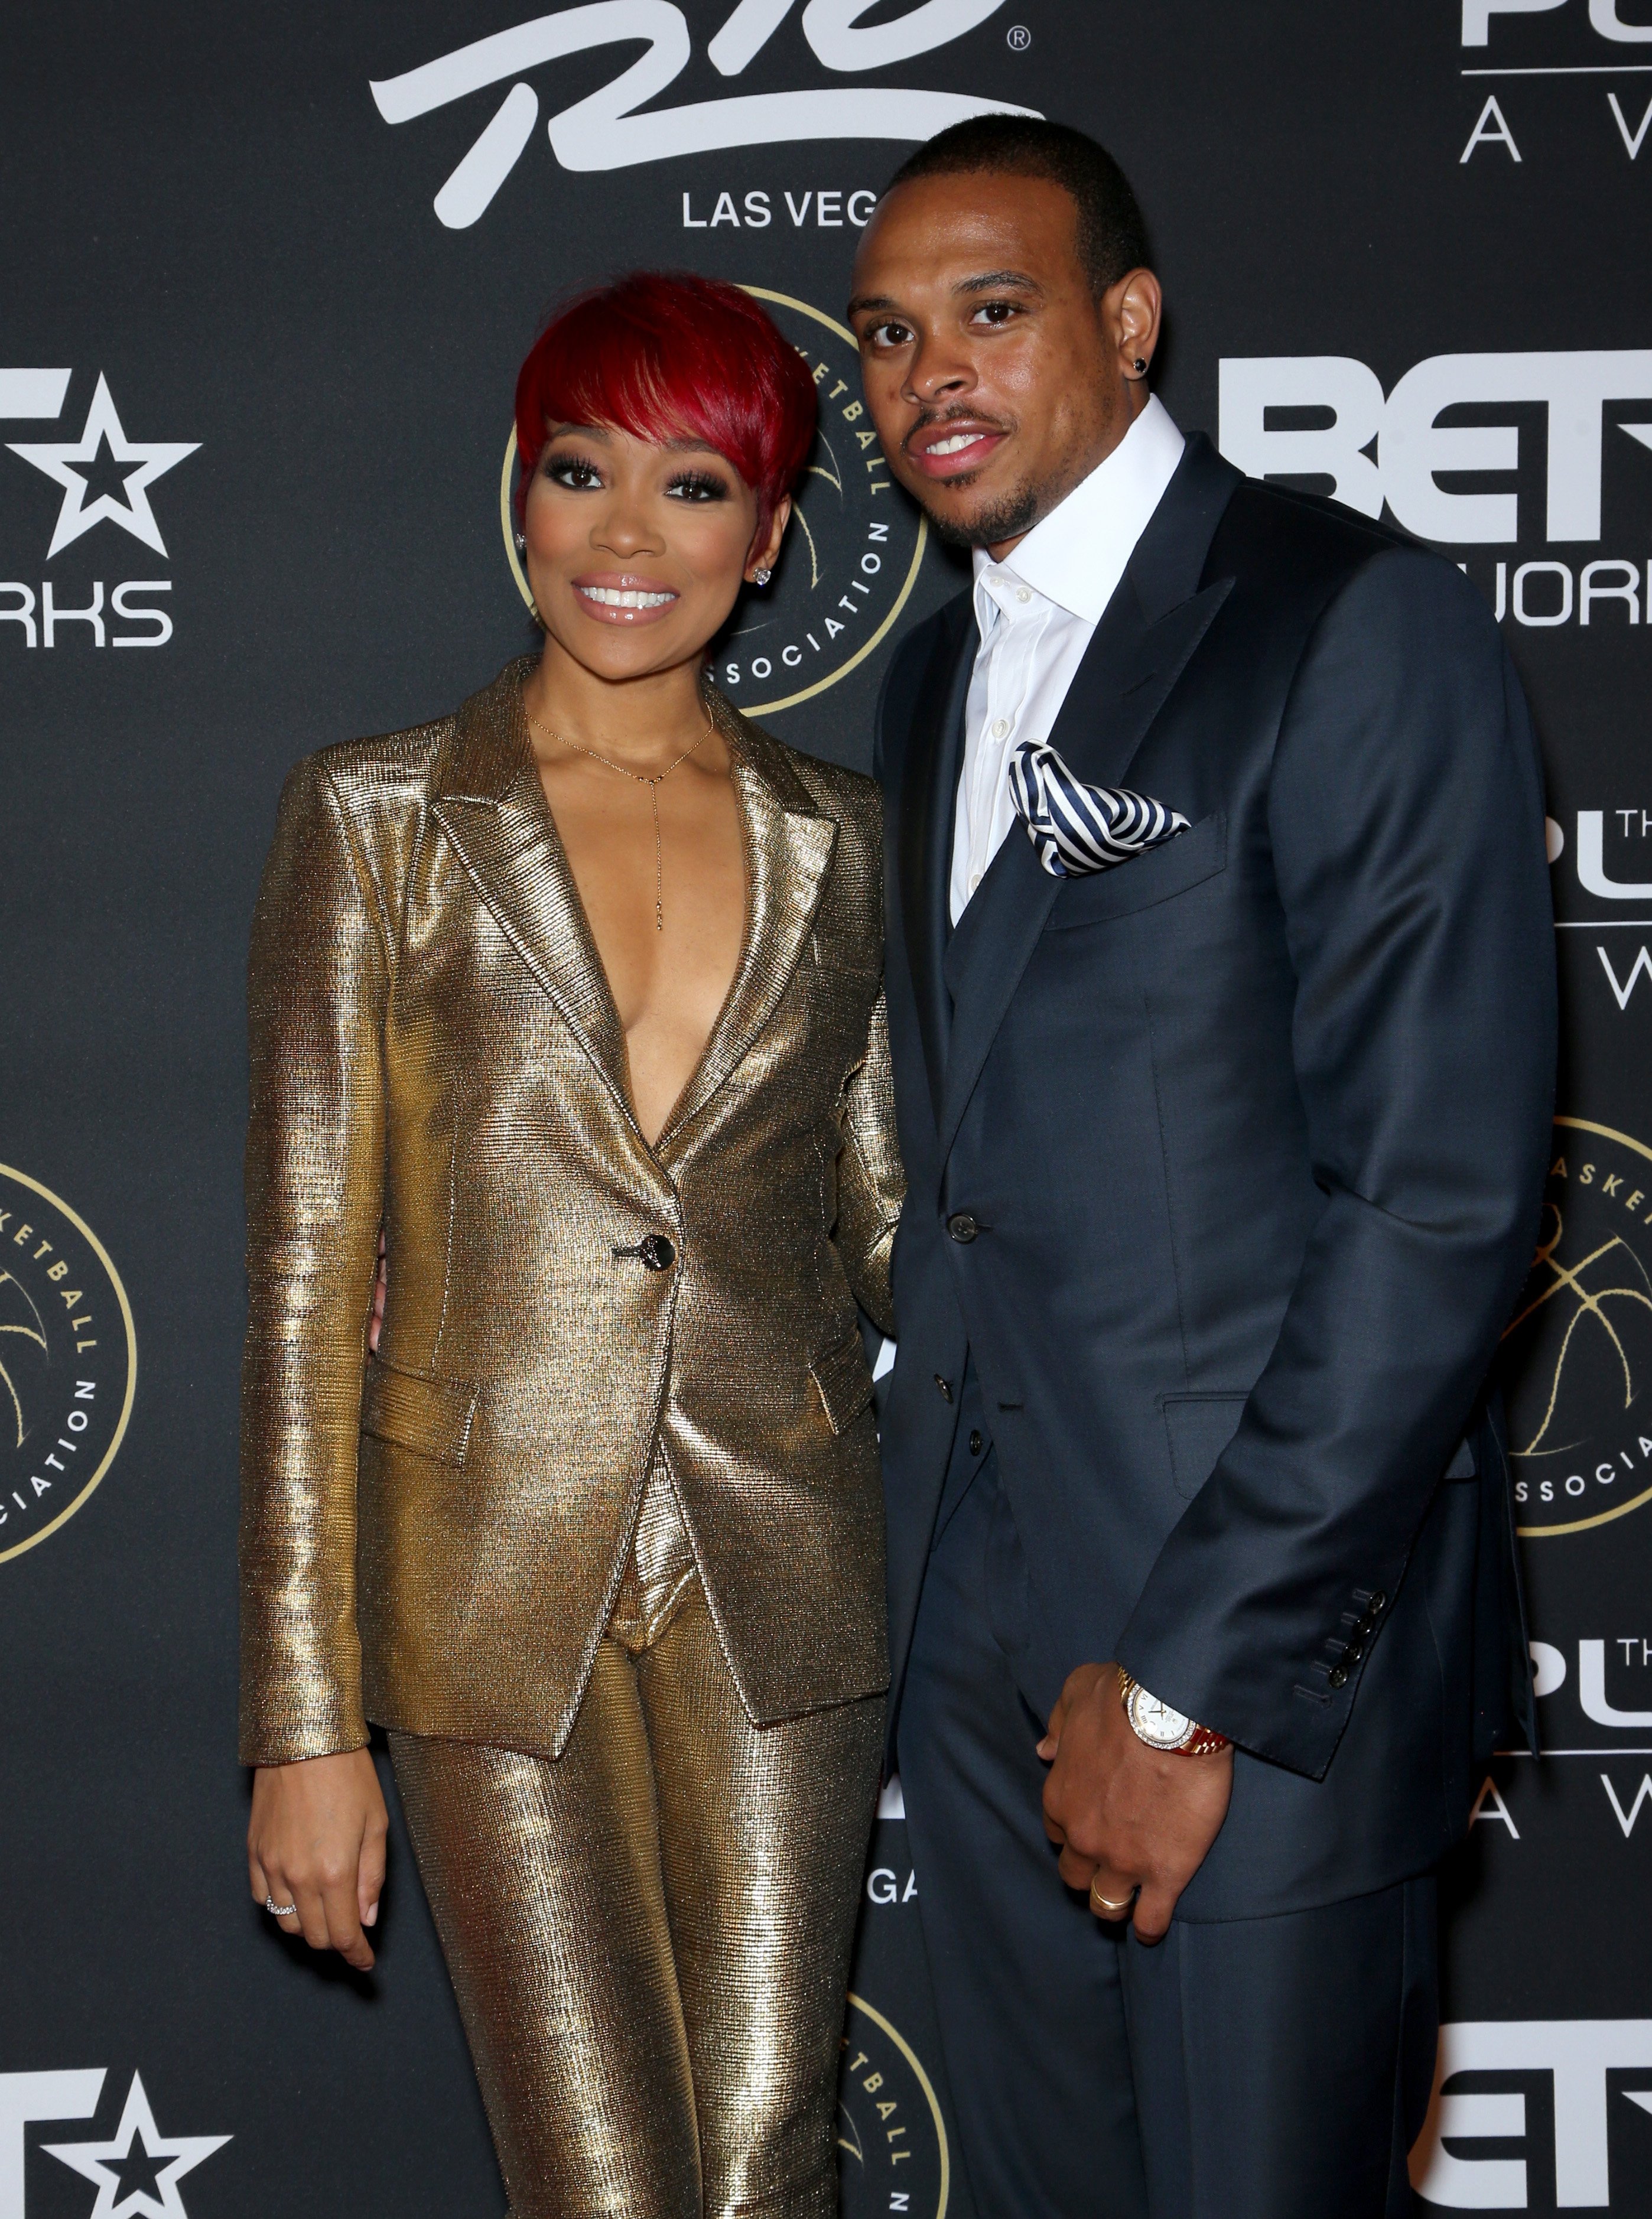 Monica and Shannon Brown at The Players' Awards in Las Vegas, Nevada on July 19, 2015 | Photo: Getty Images.